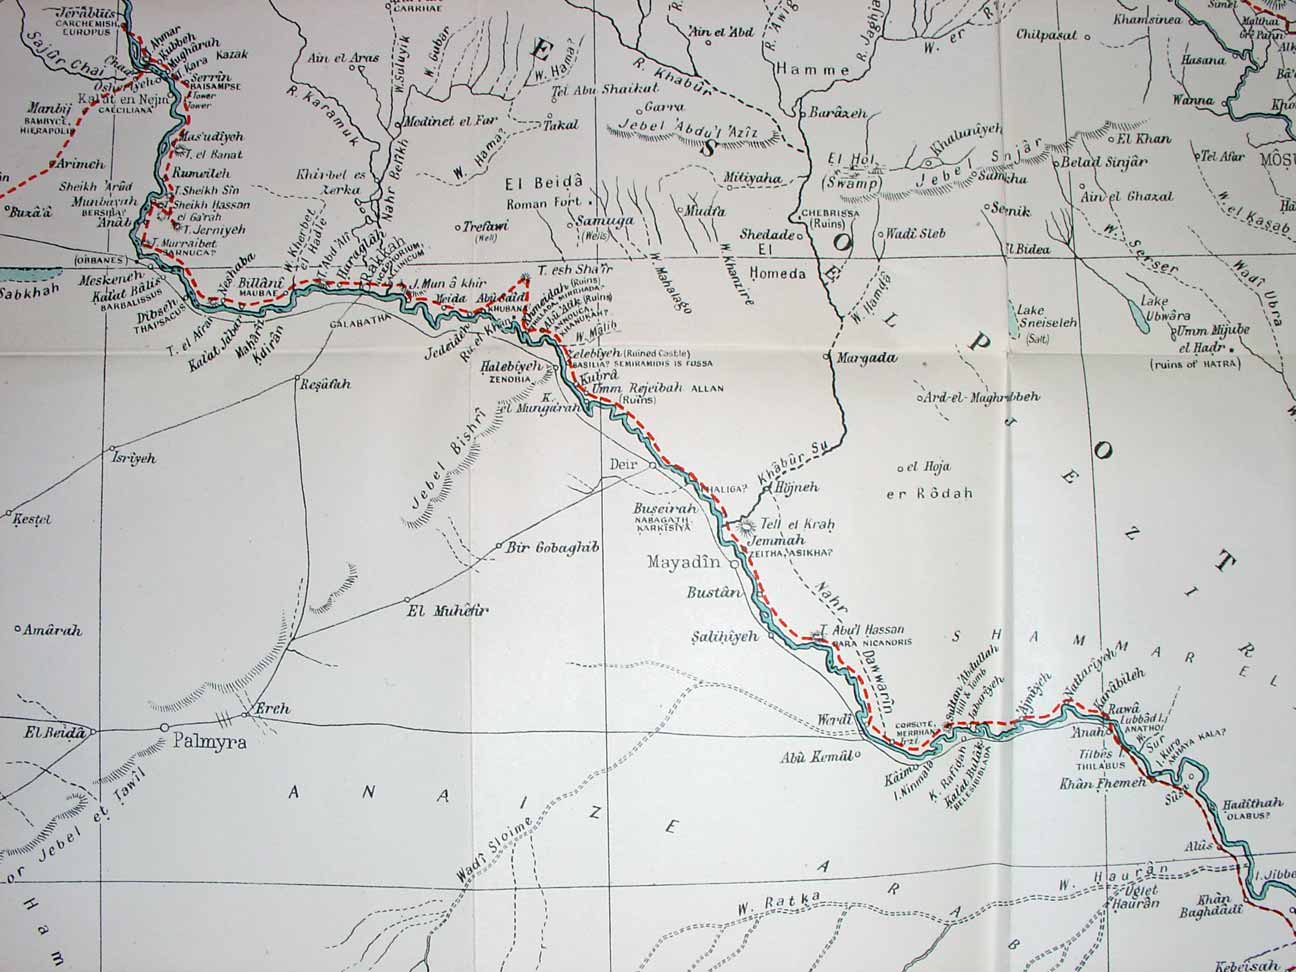 Part of Gertrude Bell's route, 38deg to 42deg, as described in 'Amurath to Amurath', printed size 18cm wide x 13.5cm deep.